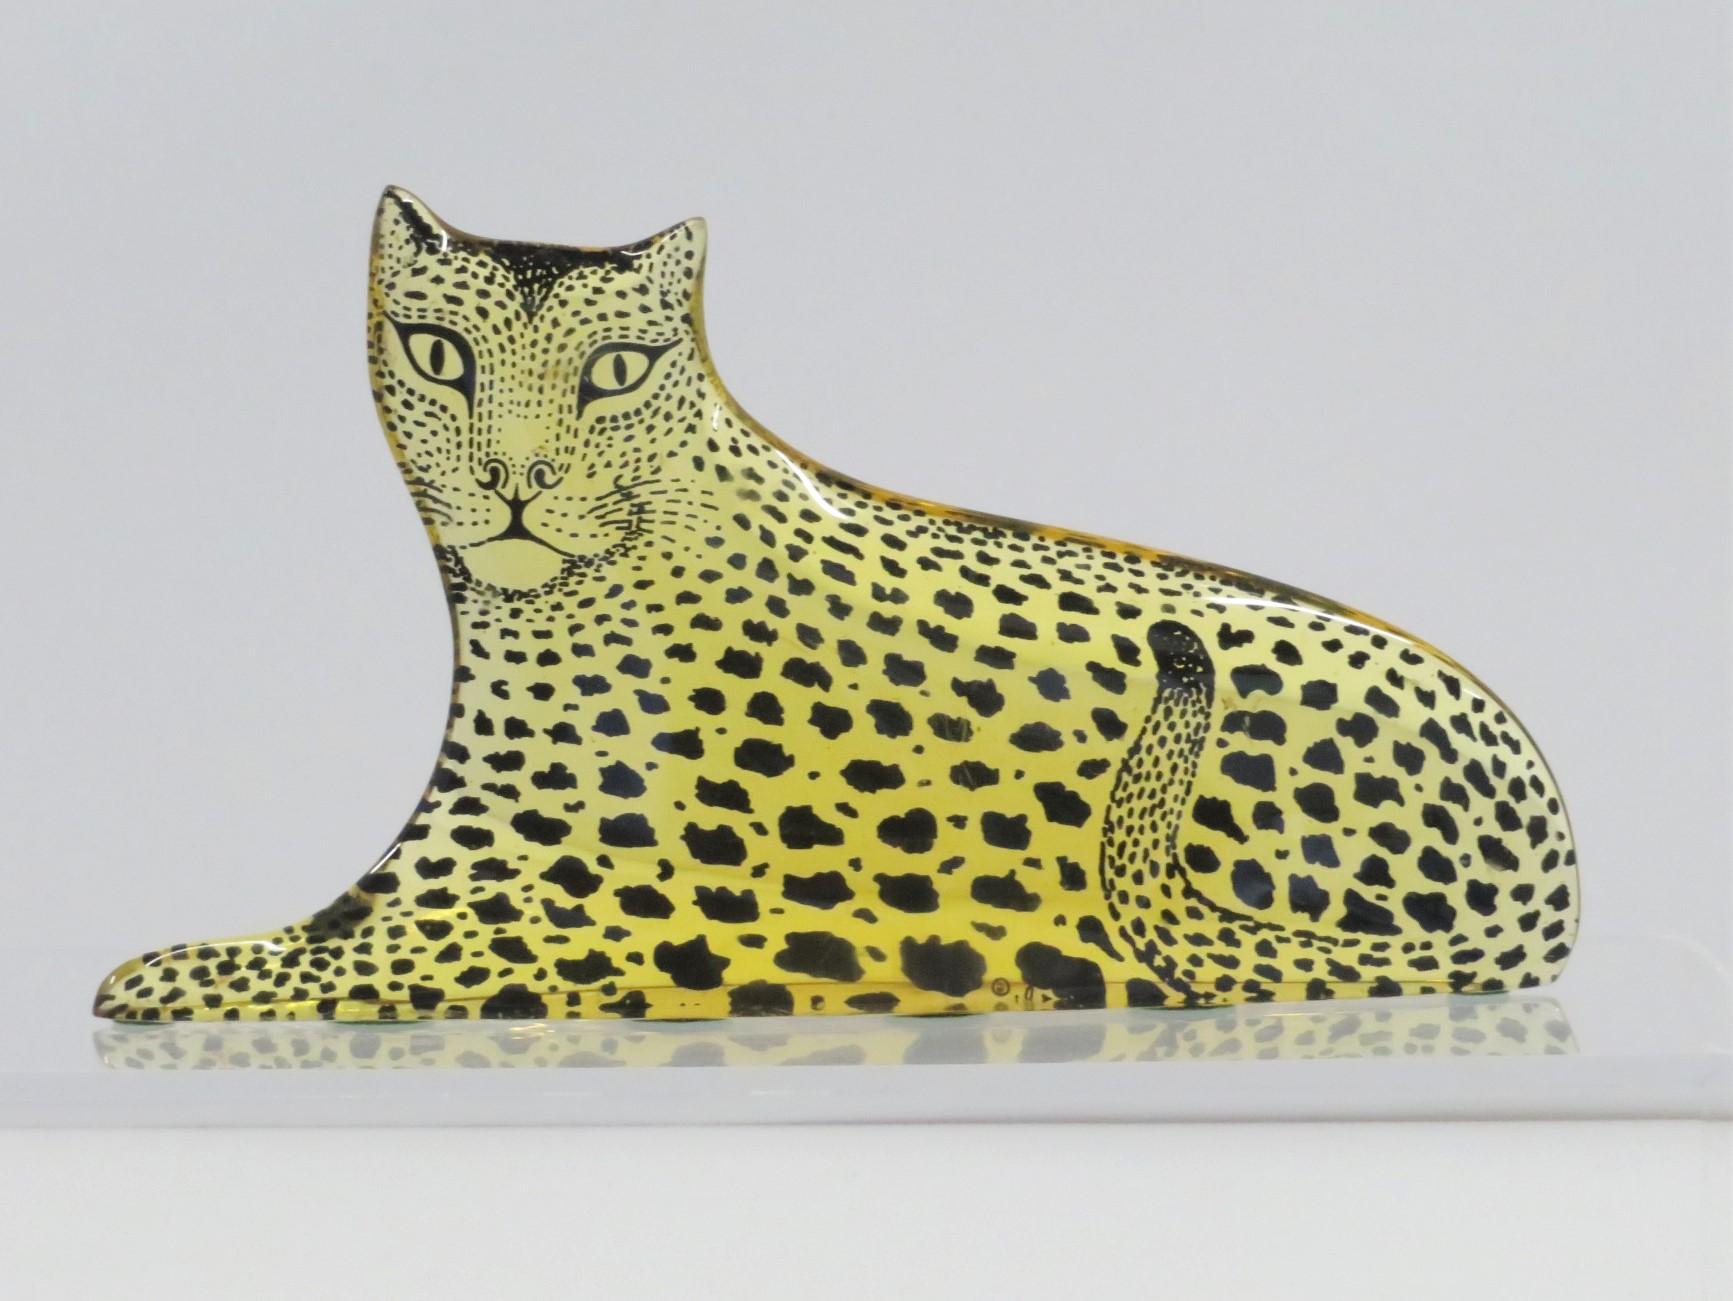 In the 1970s, Brazilian artist Abraham Palatnik, a pioneer of the Op Art movement and the founder of the technological movement in Brazilian art created the Artemis Collection, which were Op Art acrylic or lucite animals. Here, one of the most